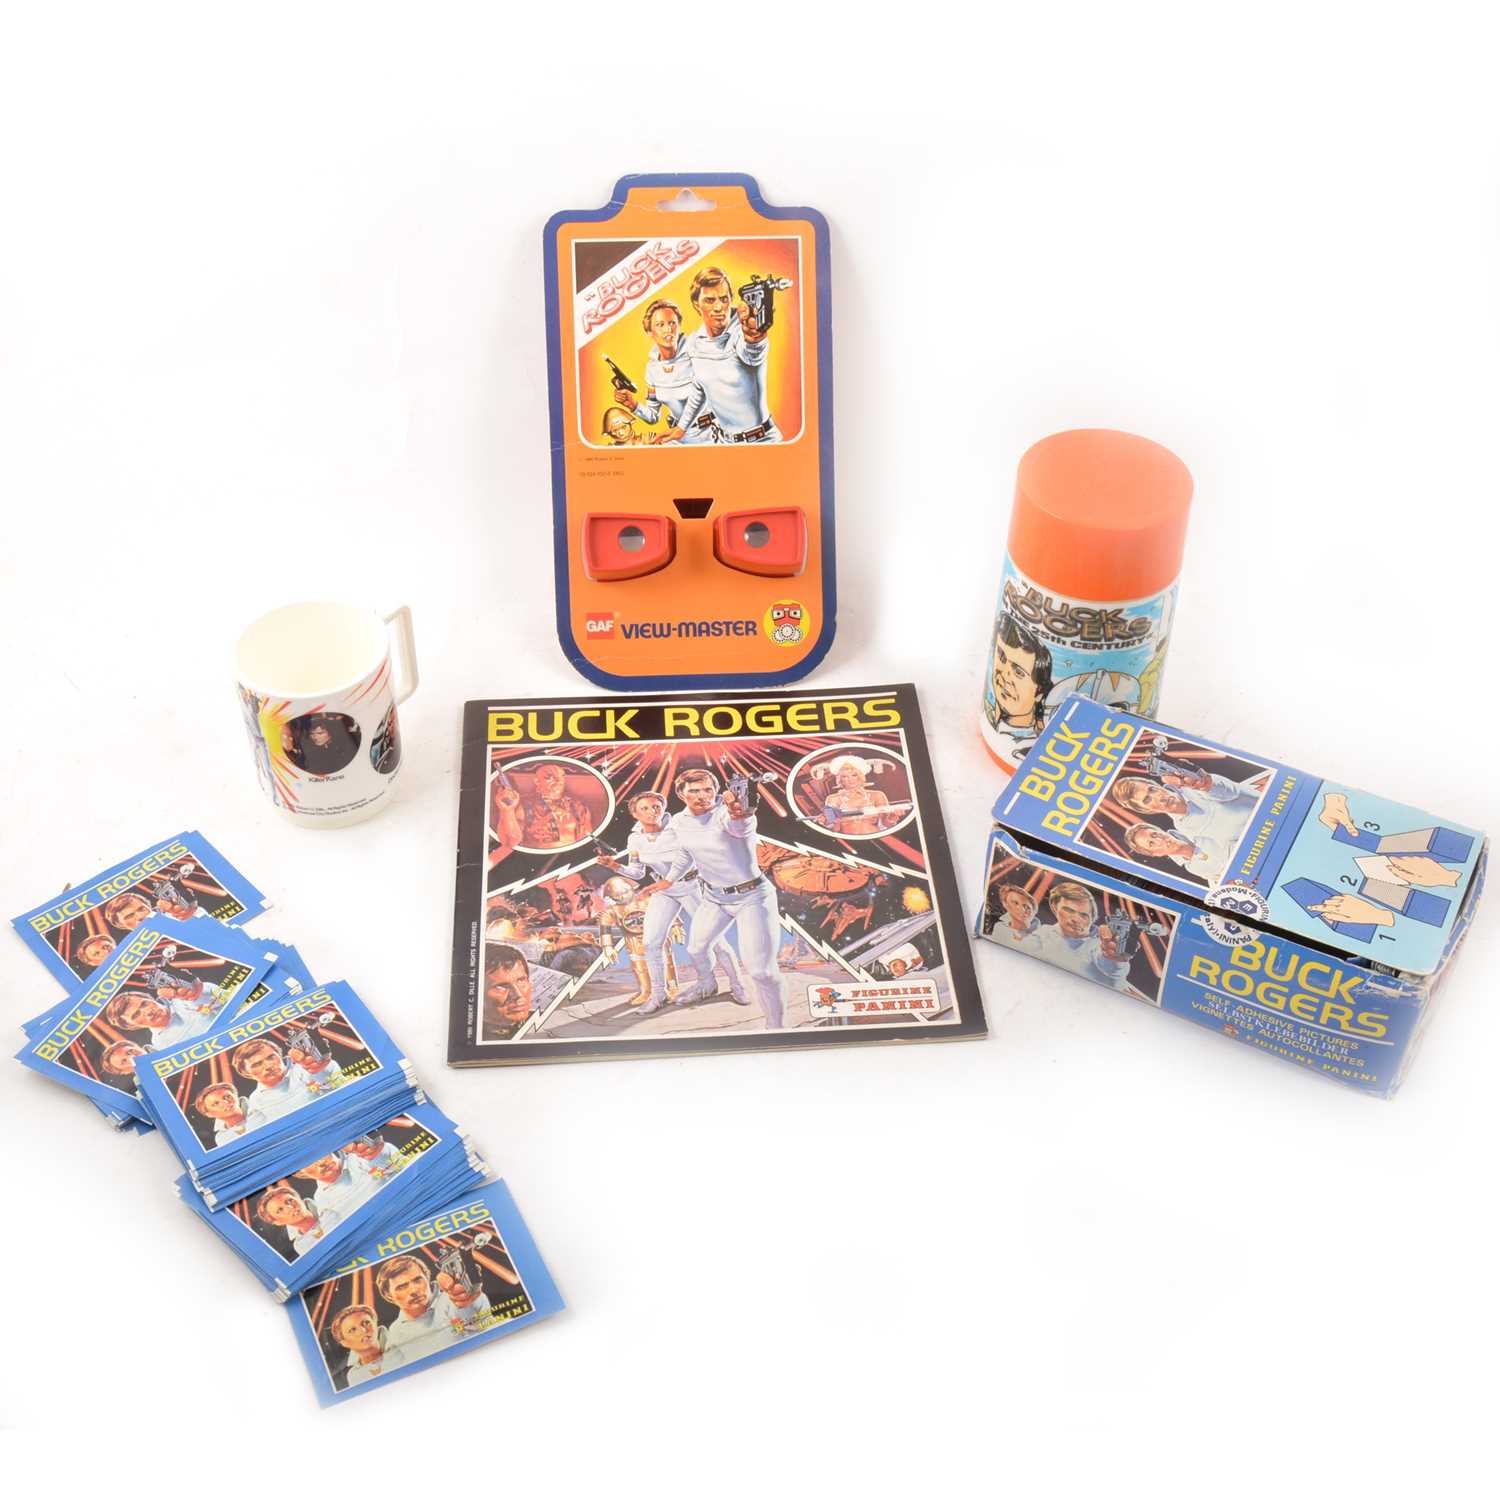 Lot 23 - Buck Rogers flask, Panini stickers, Topps trade cards etc.